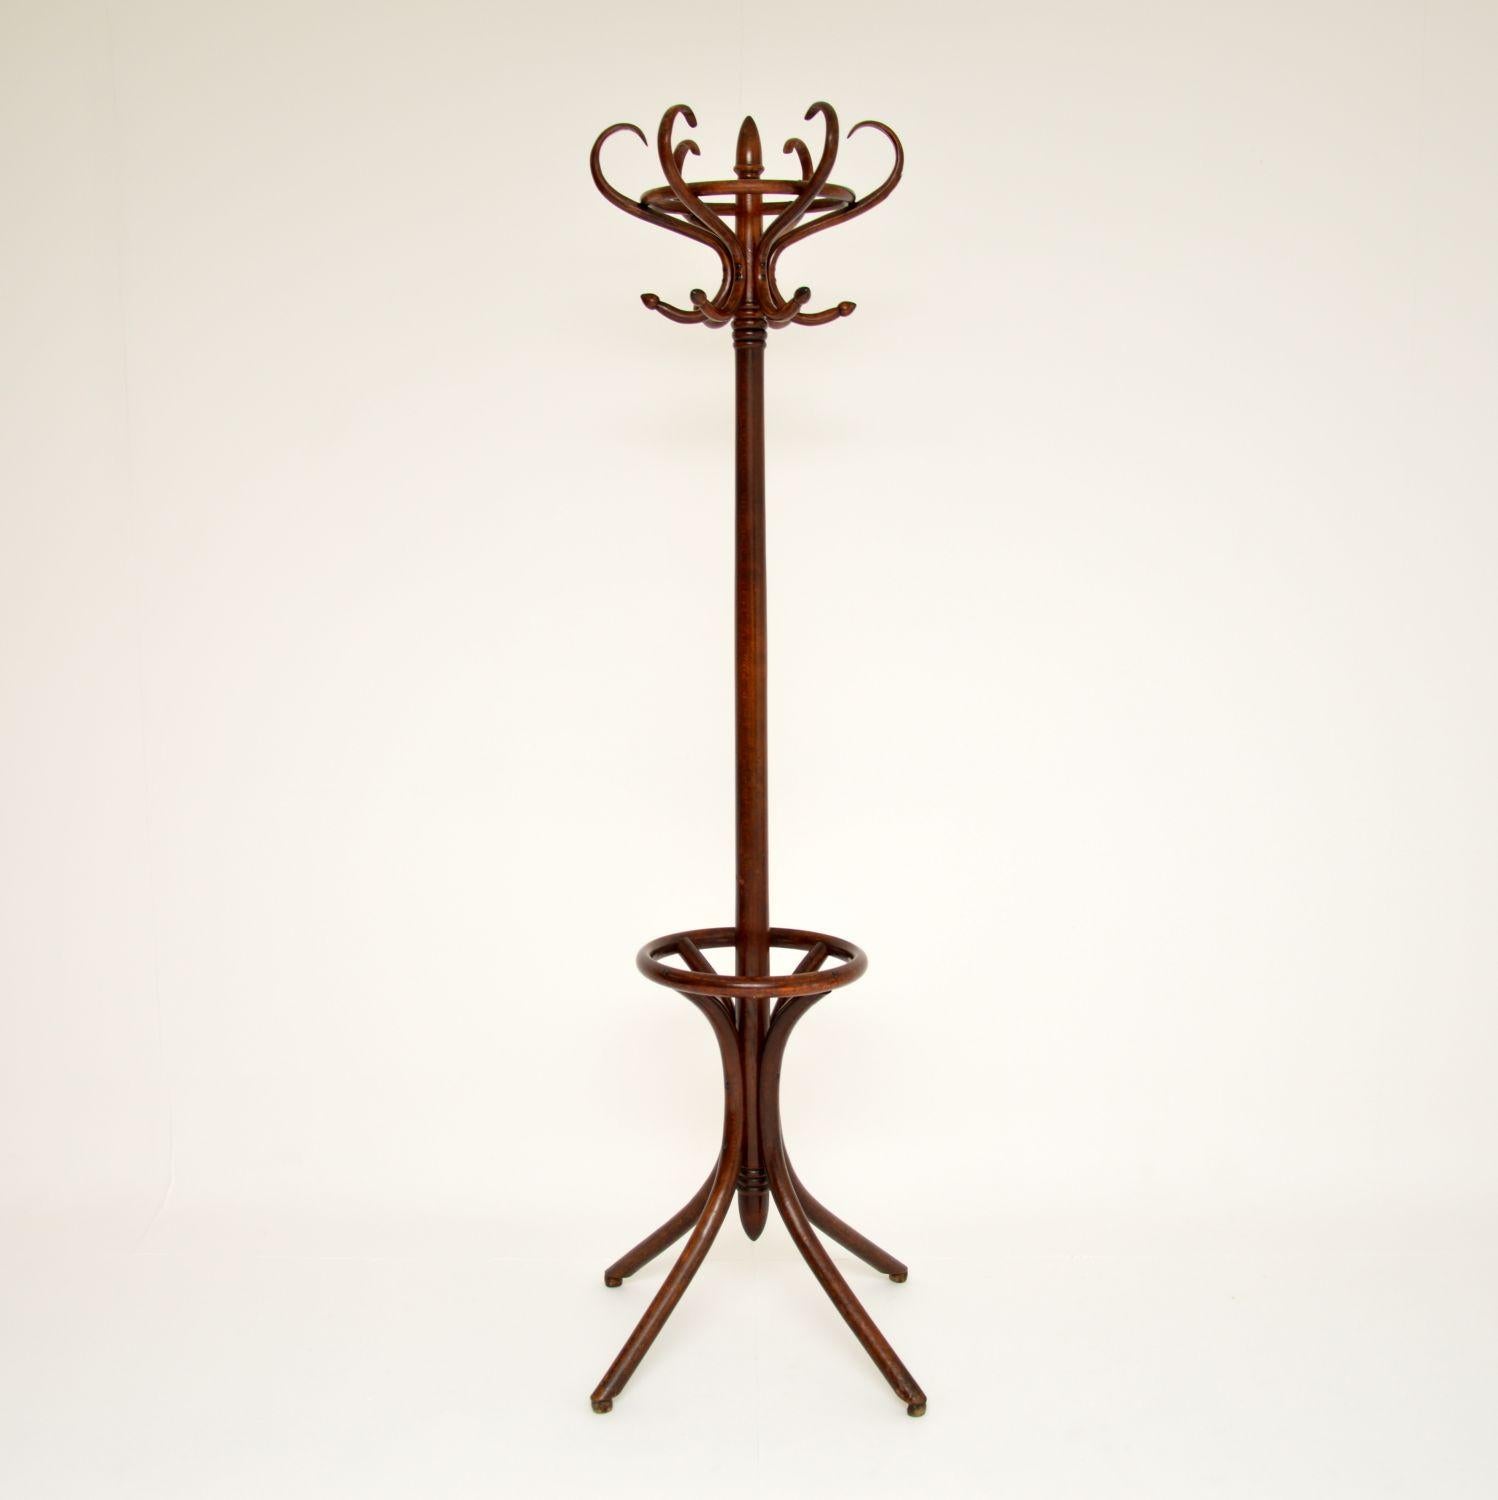 An amazing original antique bentwood hatstand. This was made in central Europe, most likely by Thonet in Austria around the 1880-1900 period.

It is a lovely model, with a beautifully curvaceous base. It has eight beautifully curved supports on